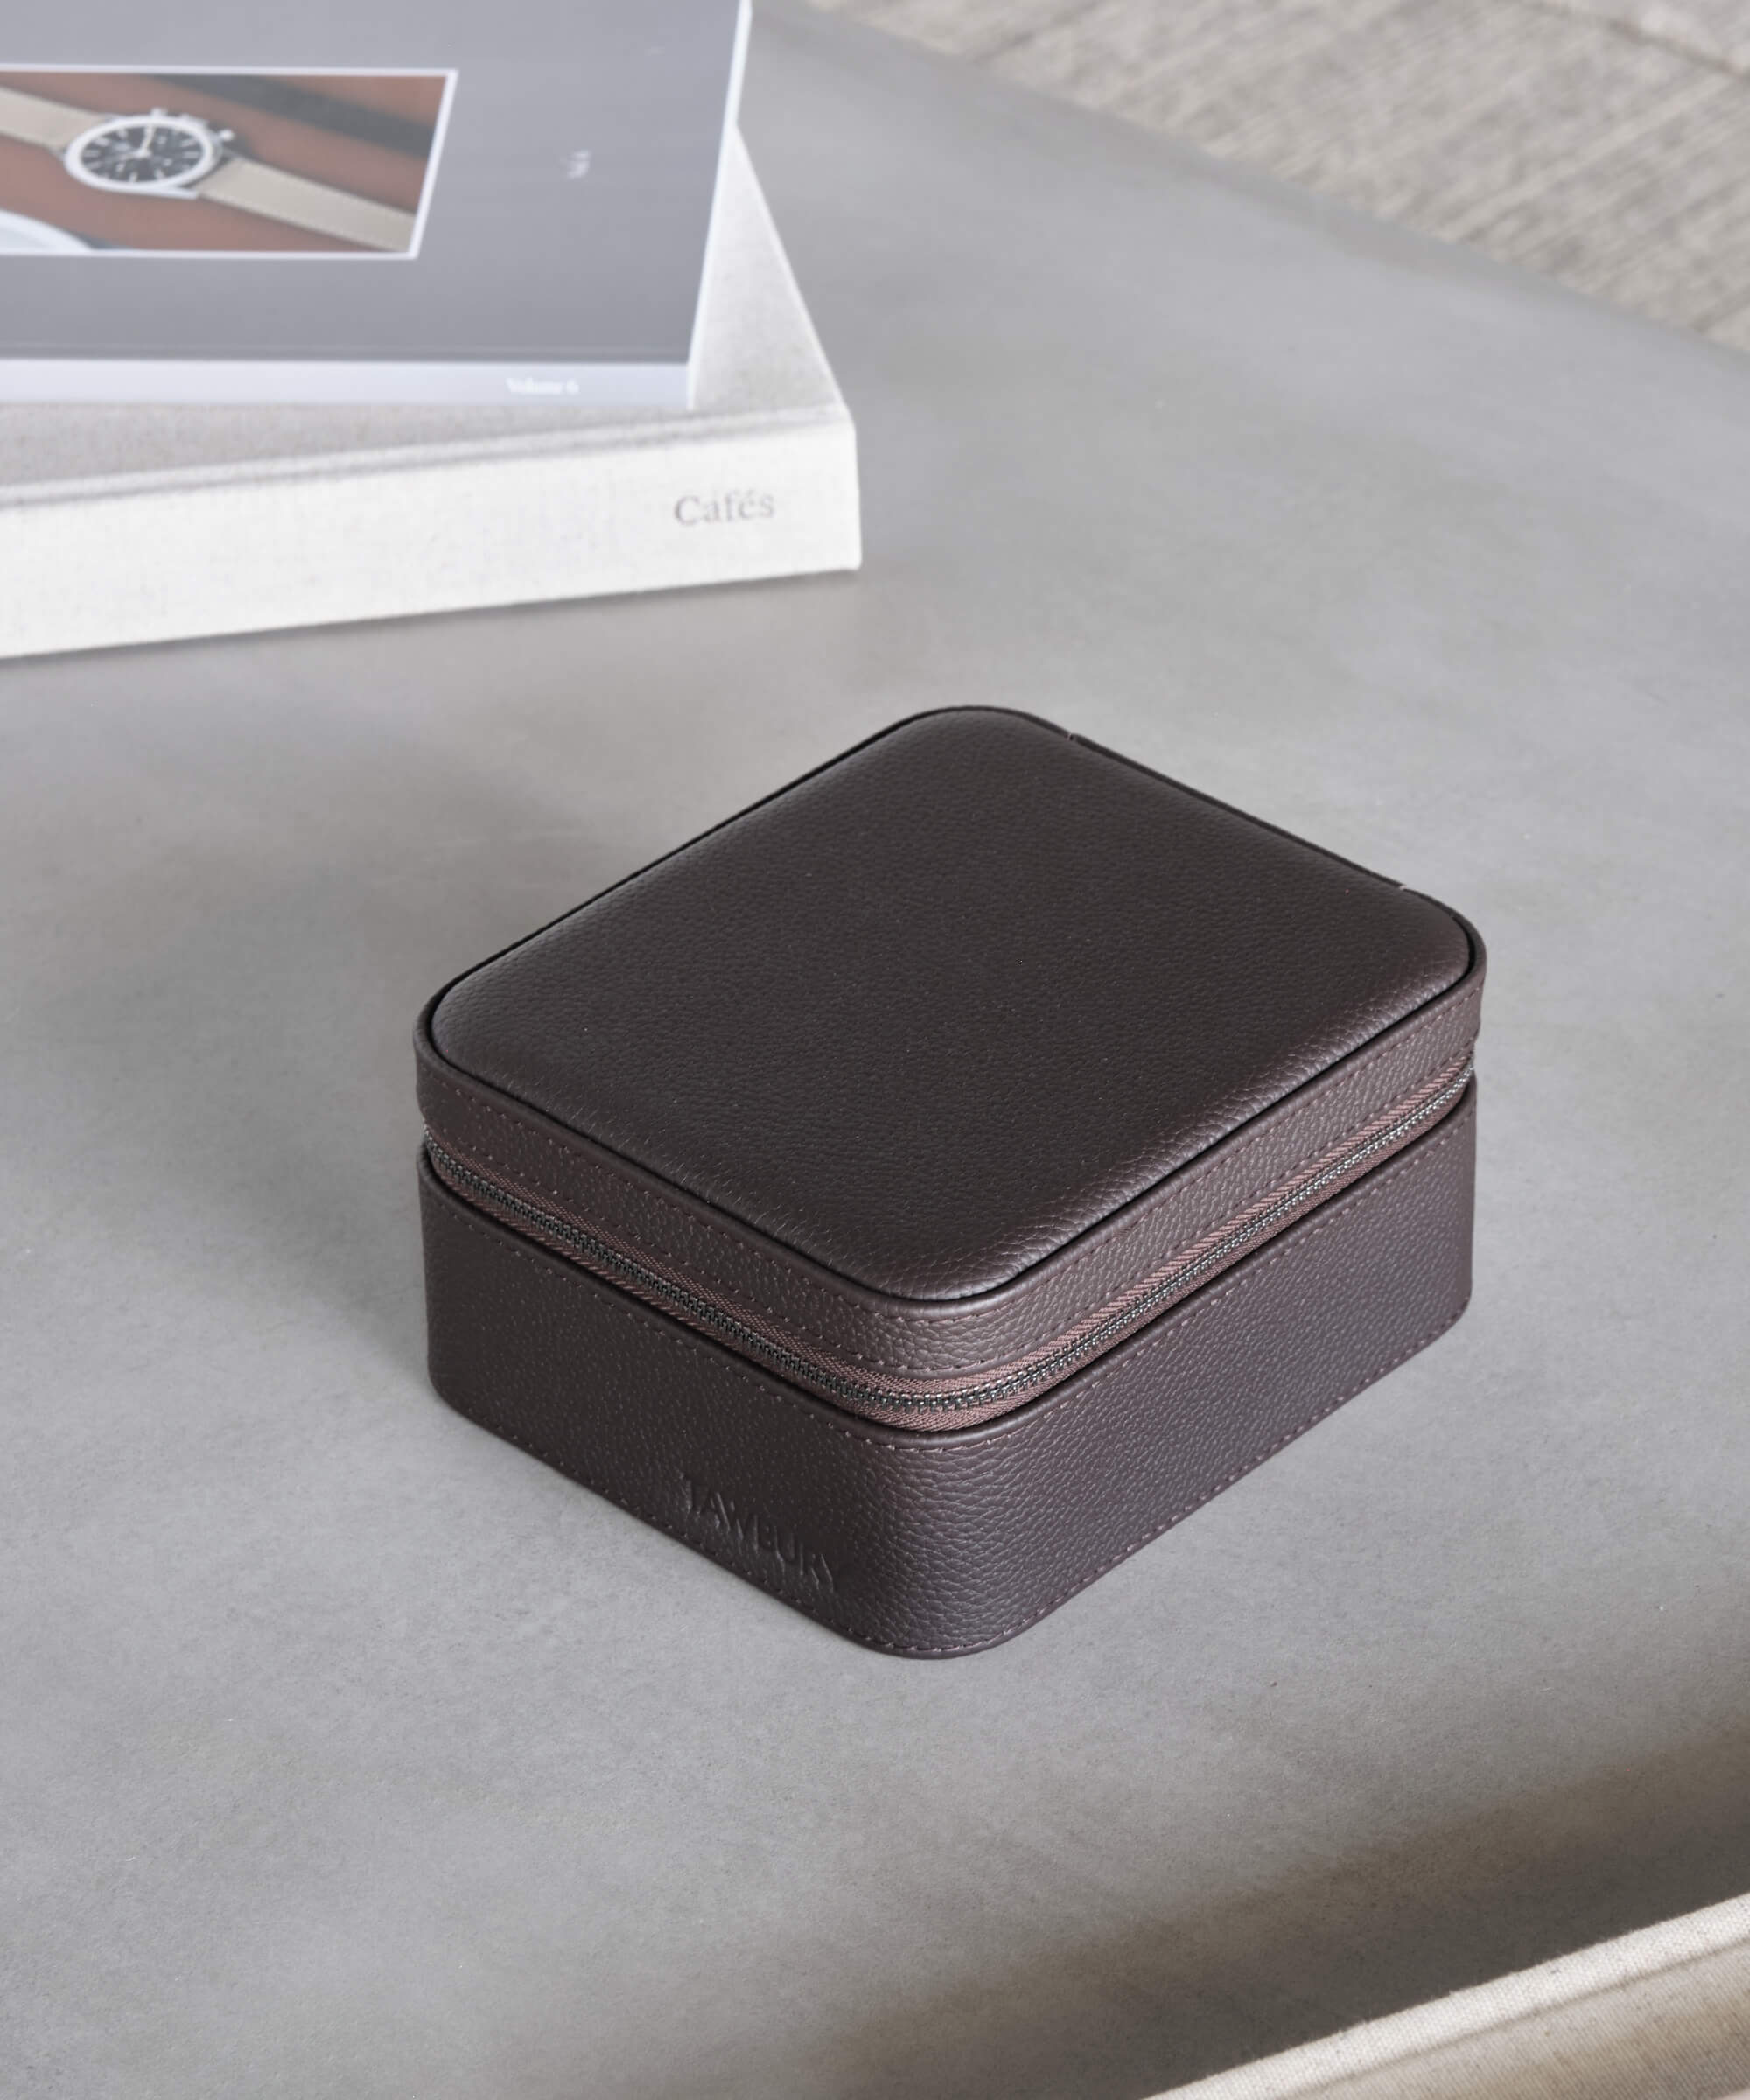 A Fraser 2 Watch Travel Case with Storage - Brown, provided by TAWBURY, is sitting on a table, providing protection for watches.